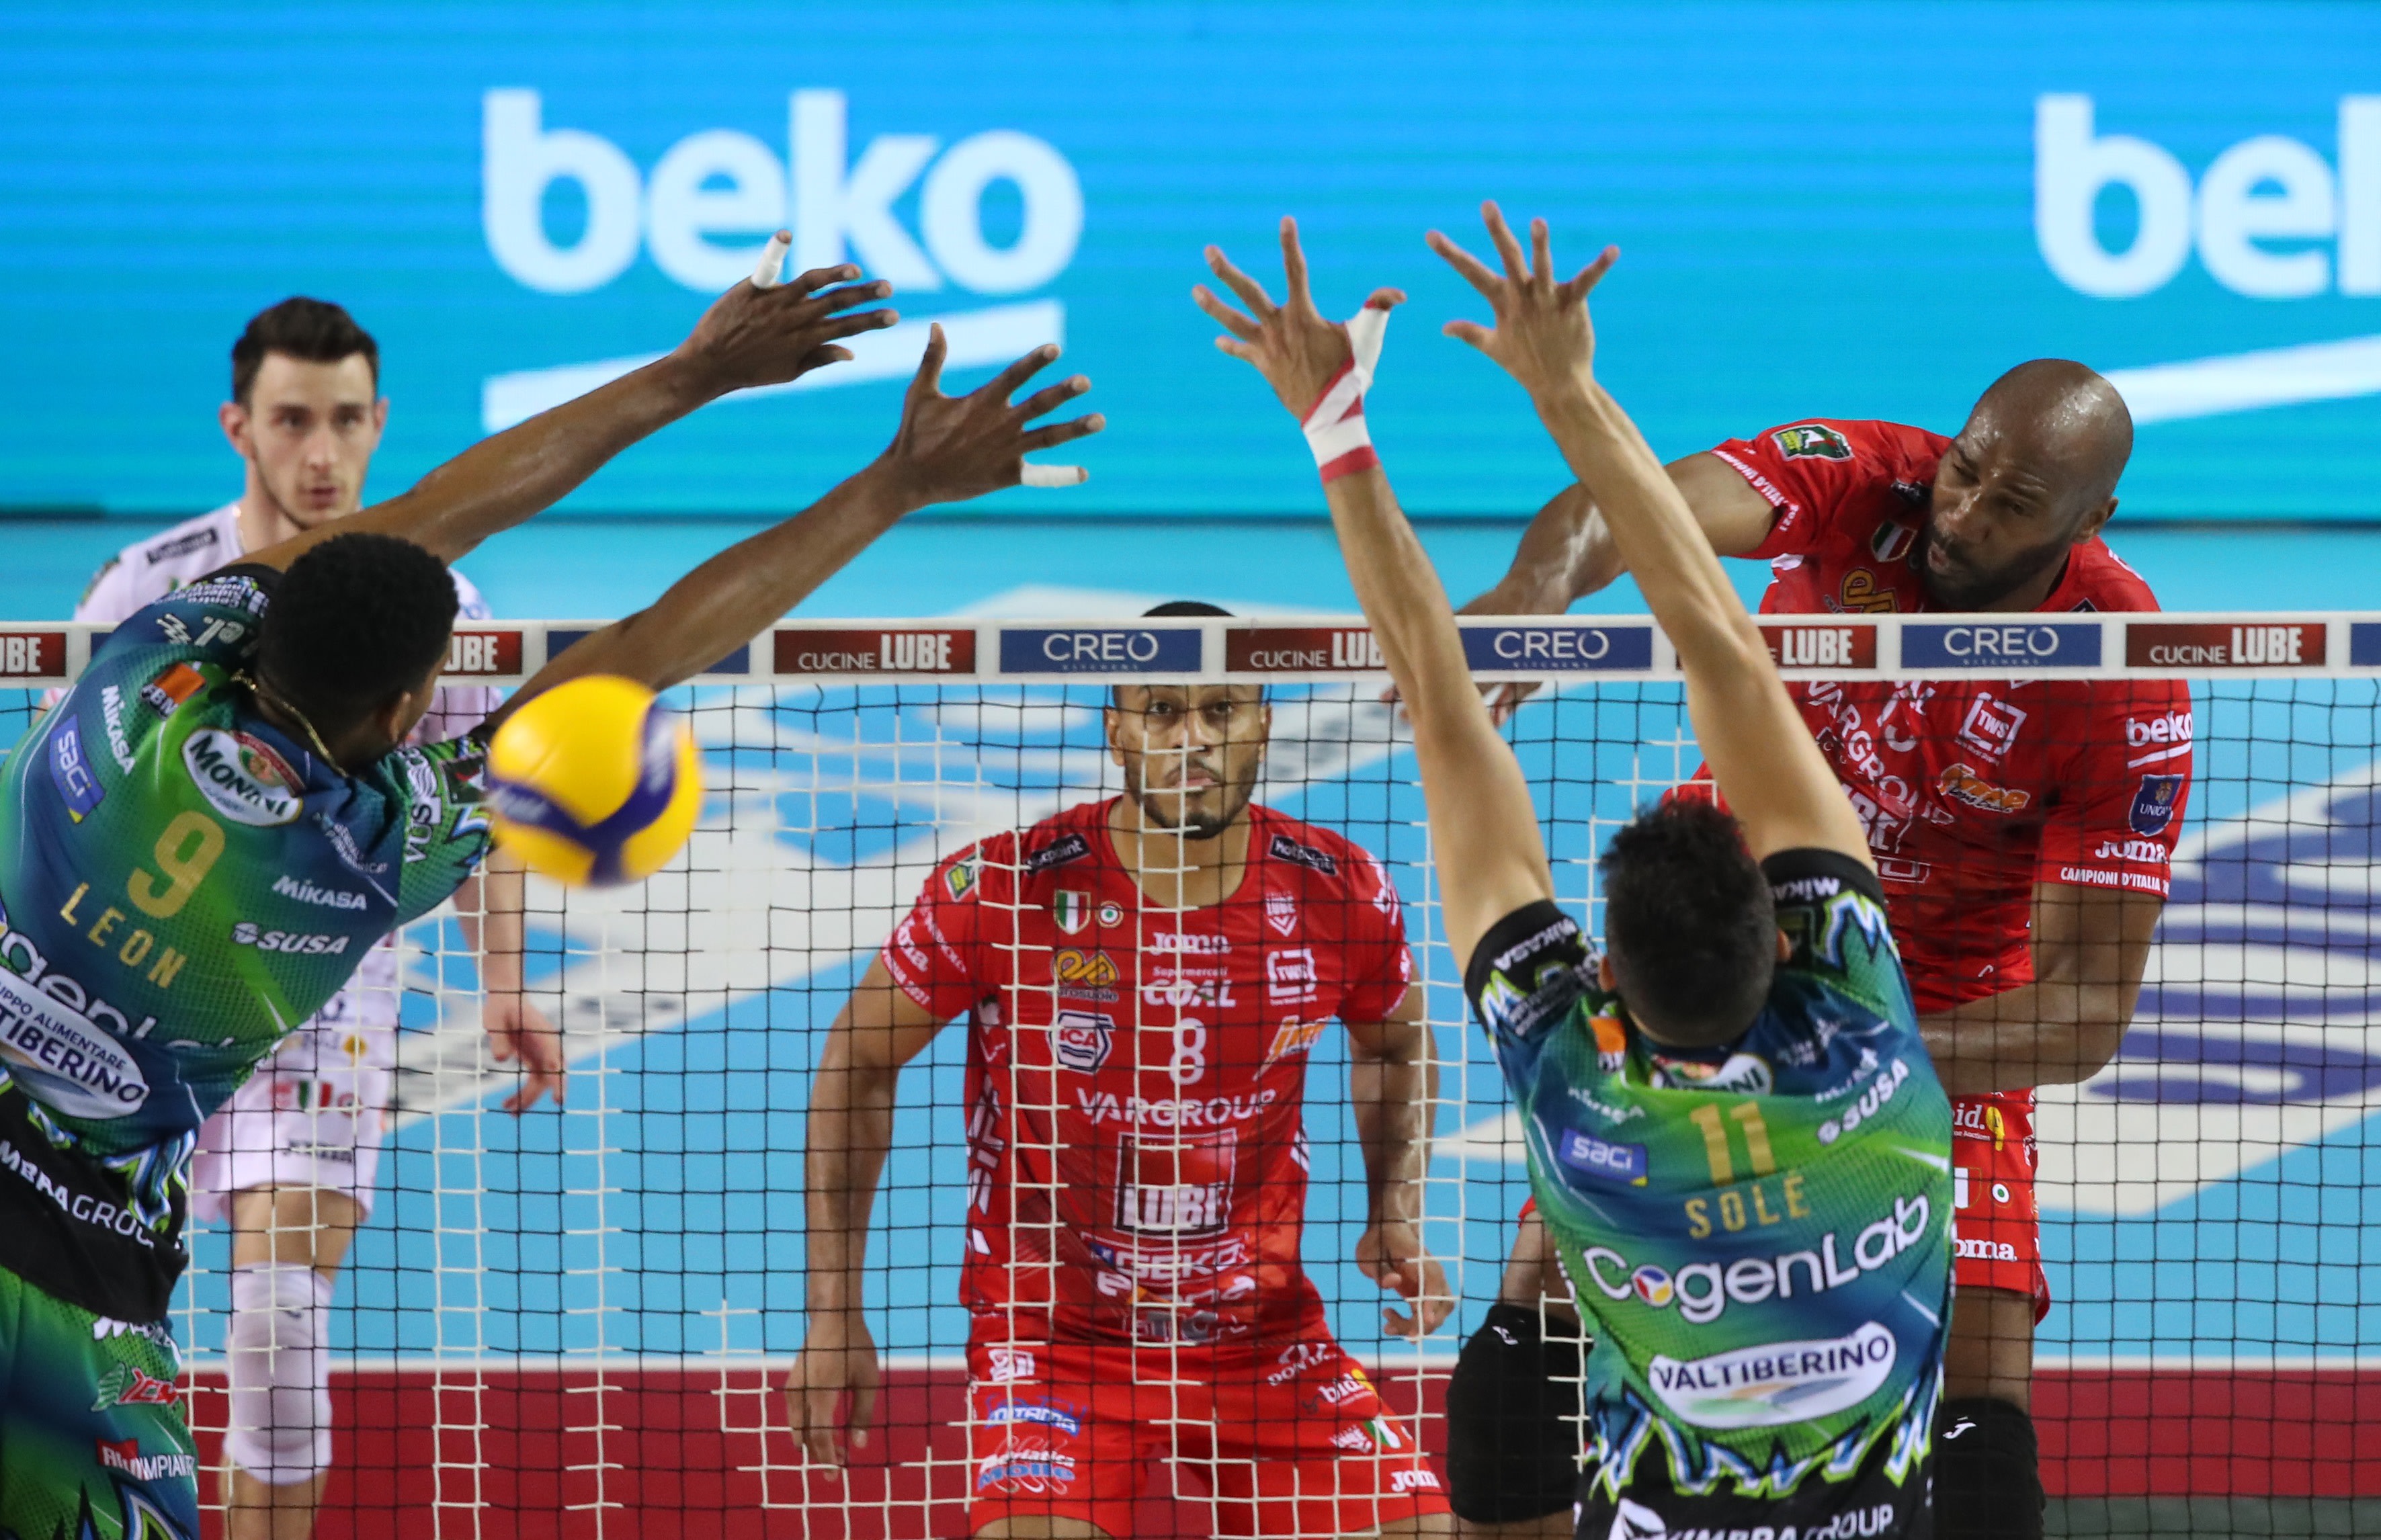 Lube earn second win against Perugia in SuperLega final volleyballworld